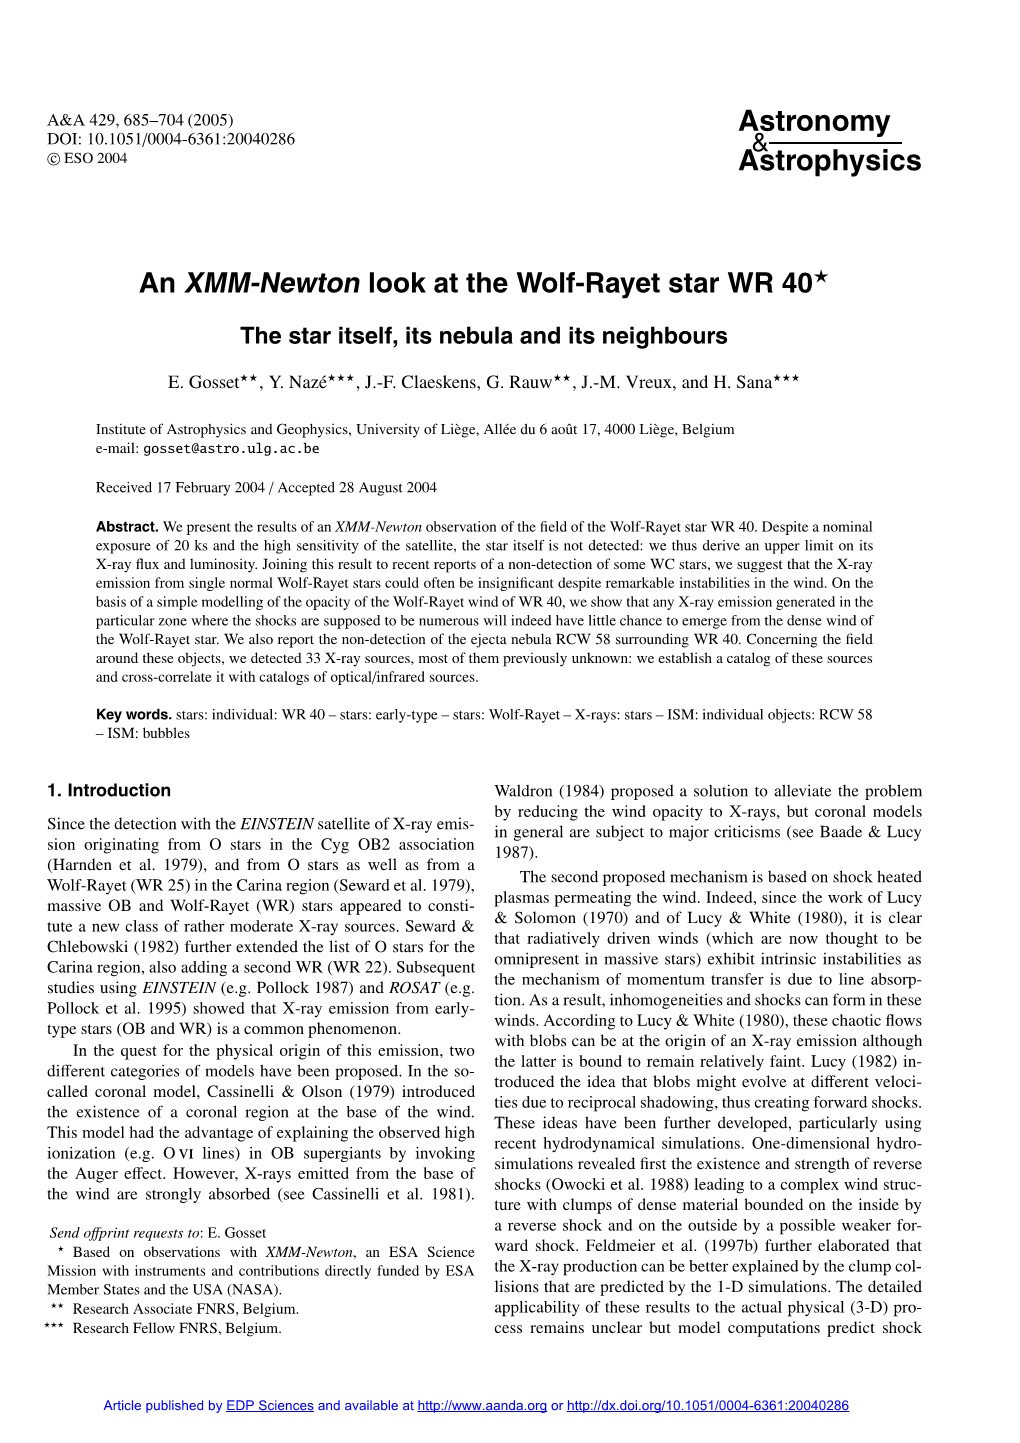 An XMM-Newton Look at the Wolf-Rayet Star WR 40